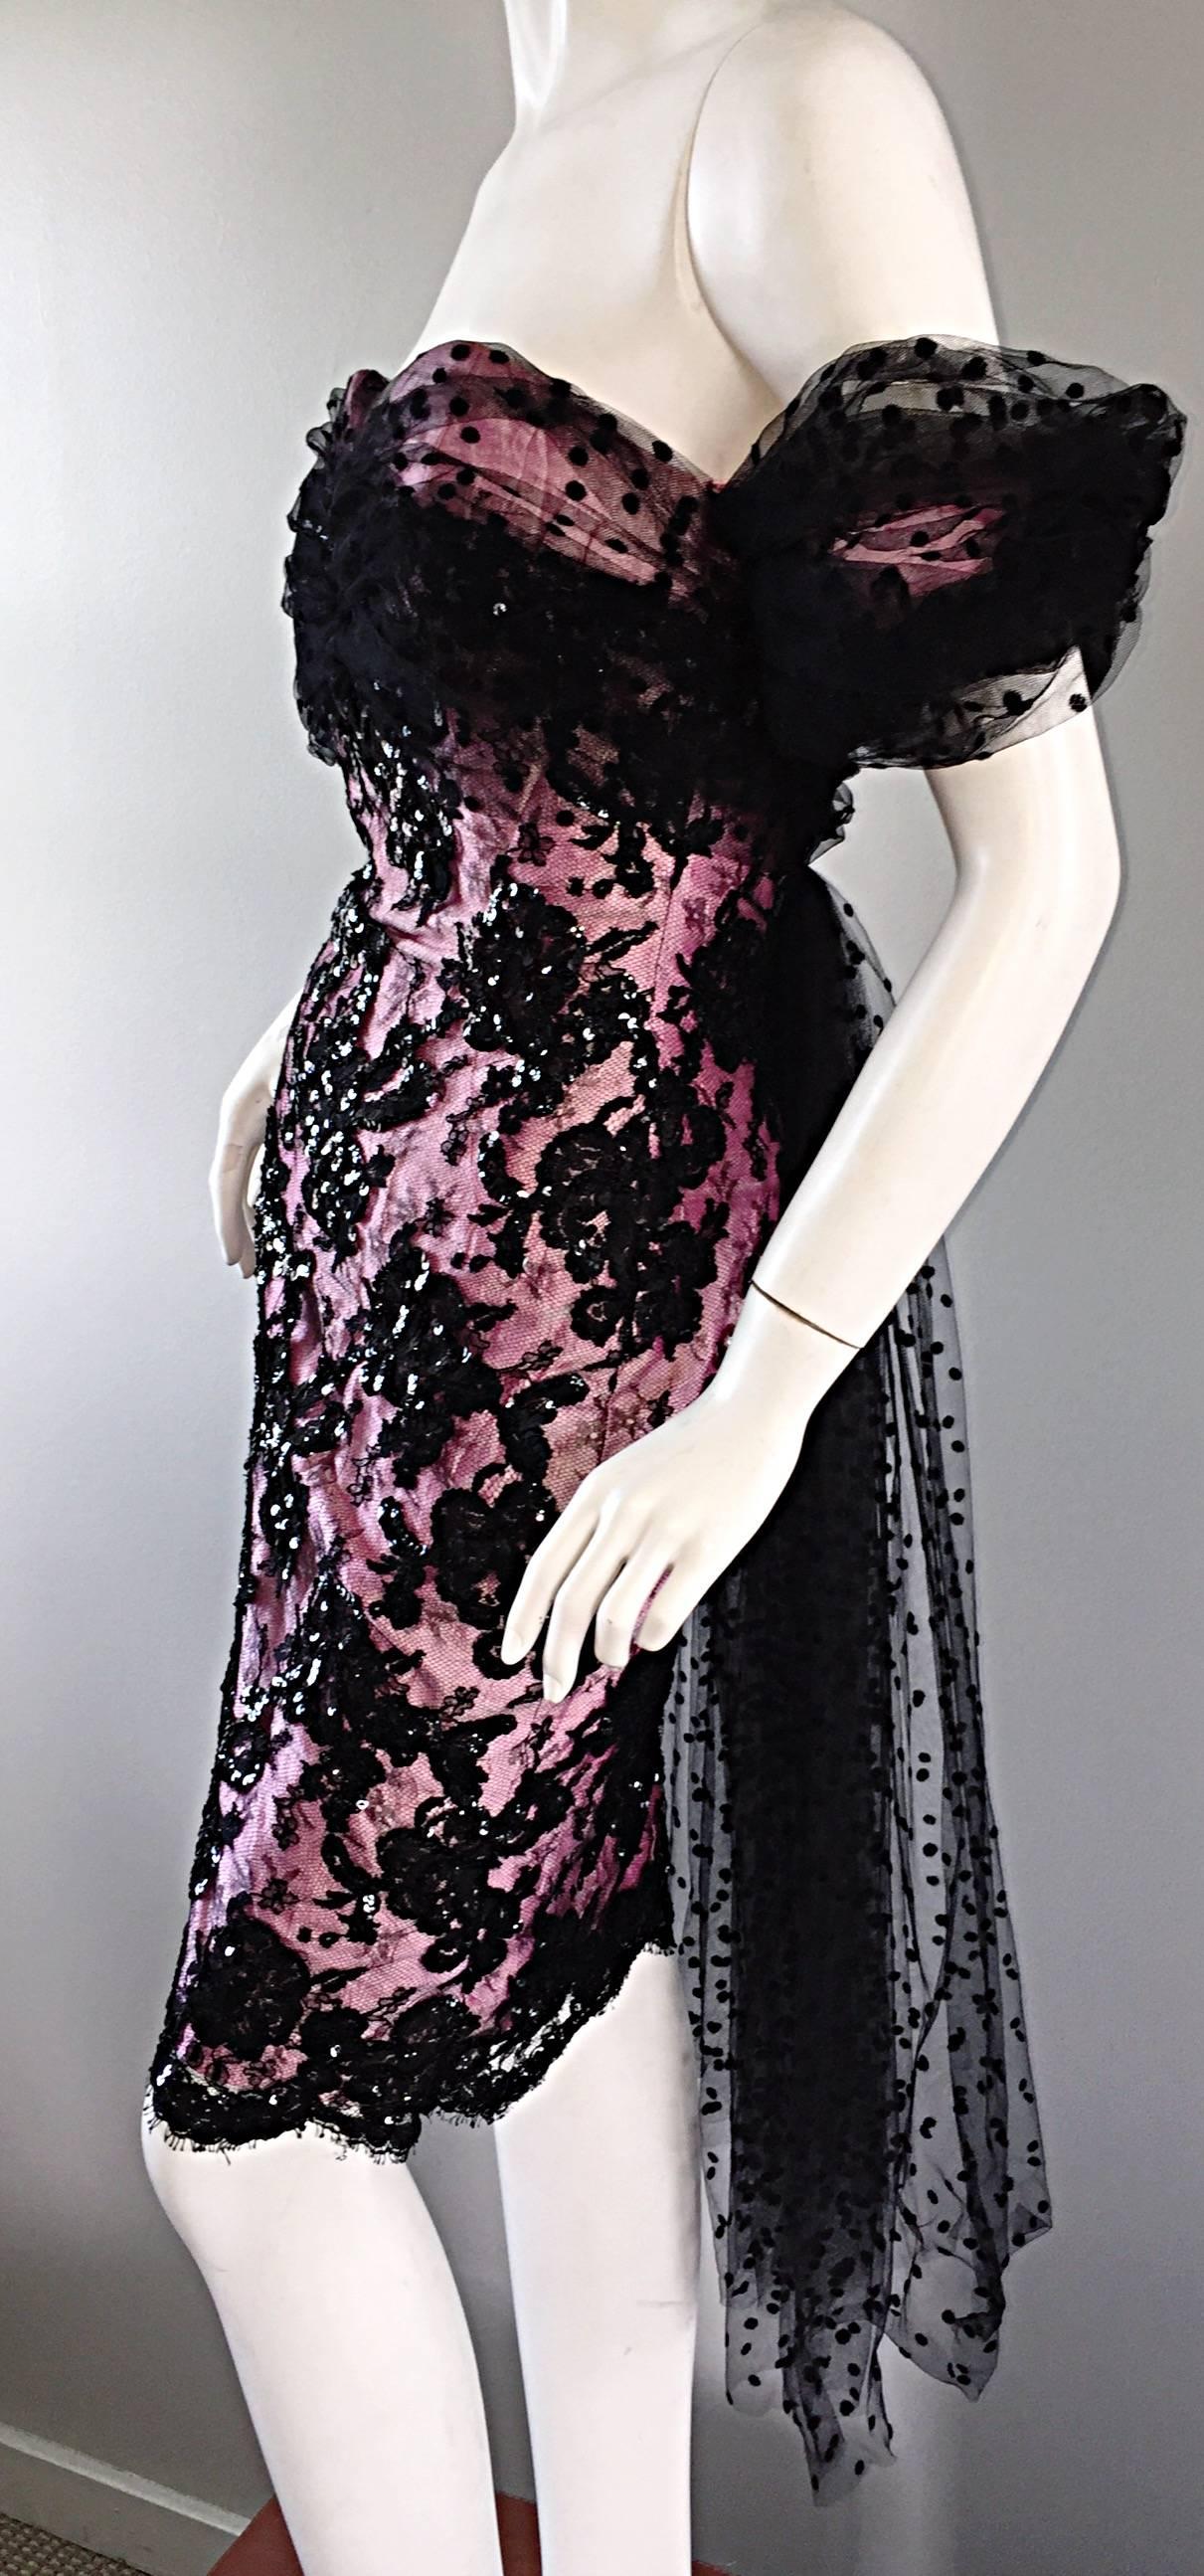 pink dress with black lace